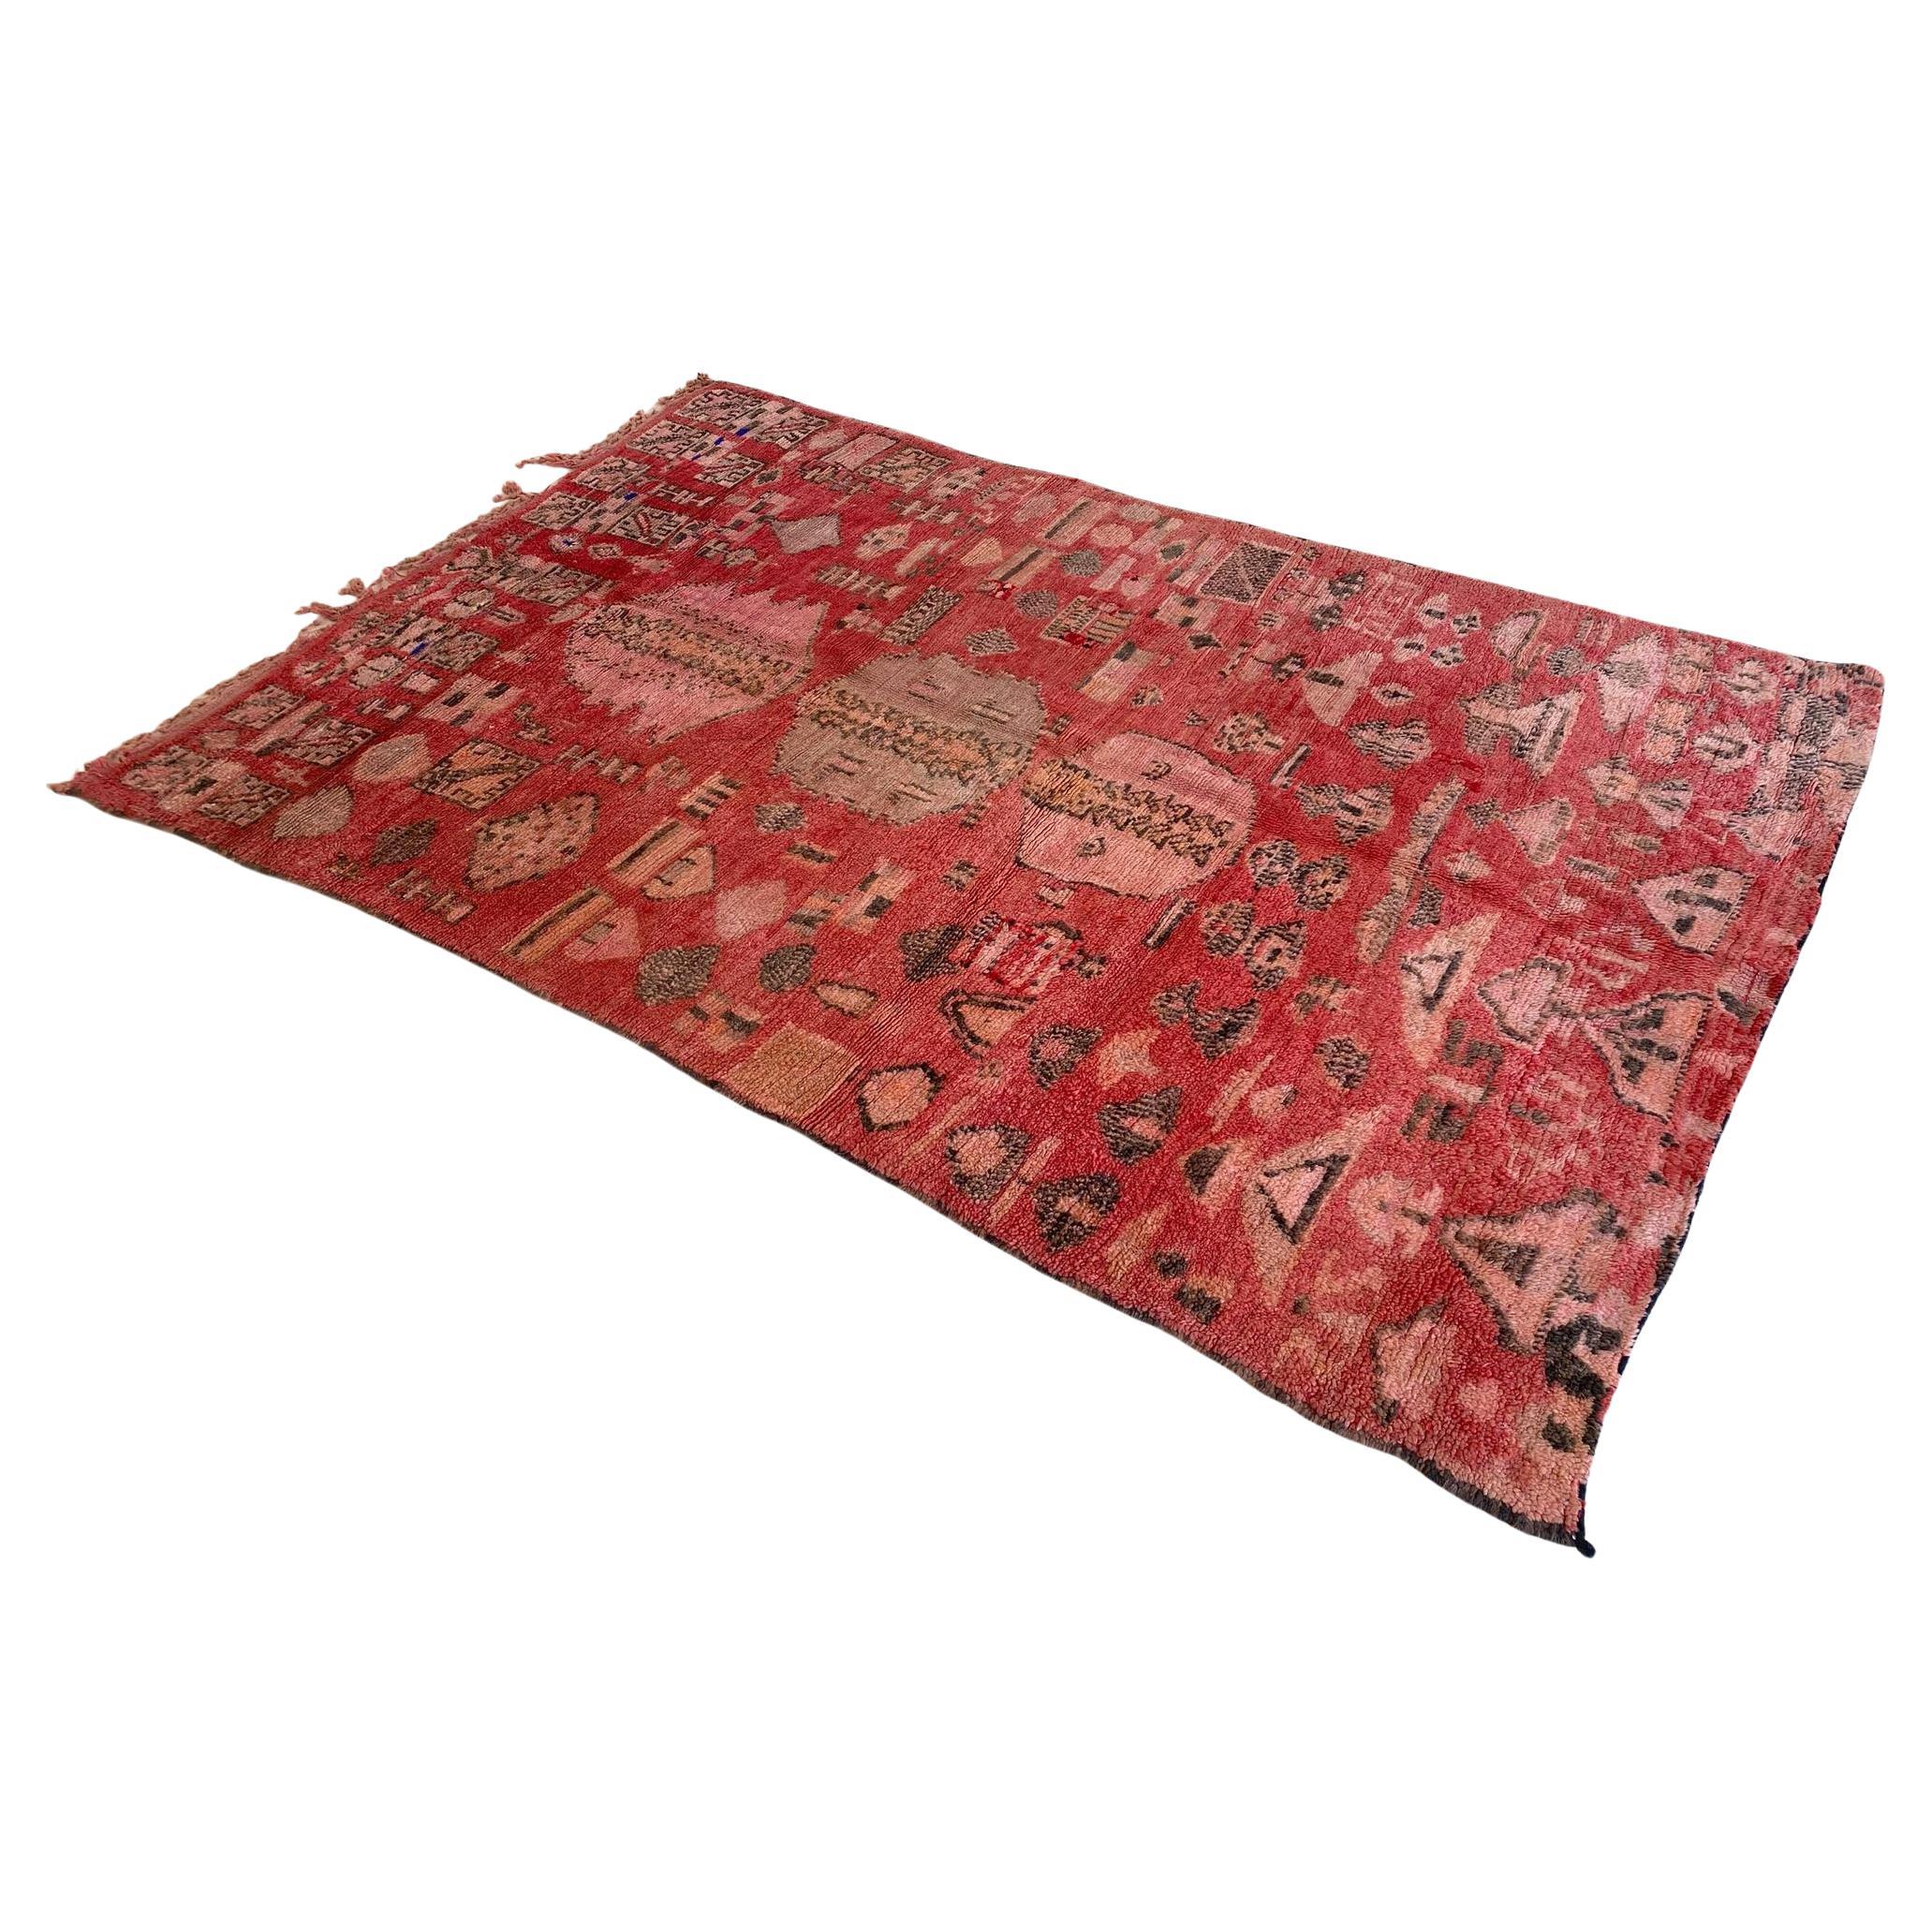 Collector Moroccan Rehamna rug - Red/pink - 5.8x8.6feet / 177x264cm For Sale